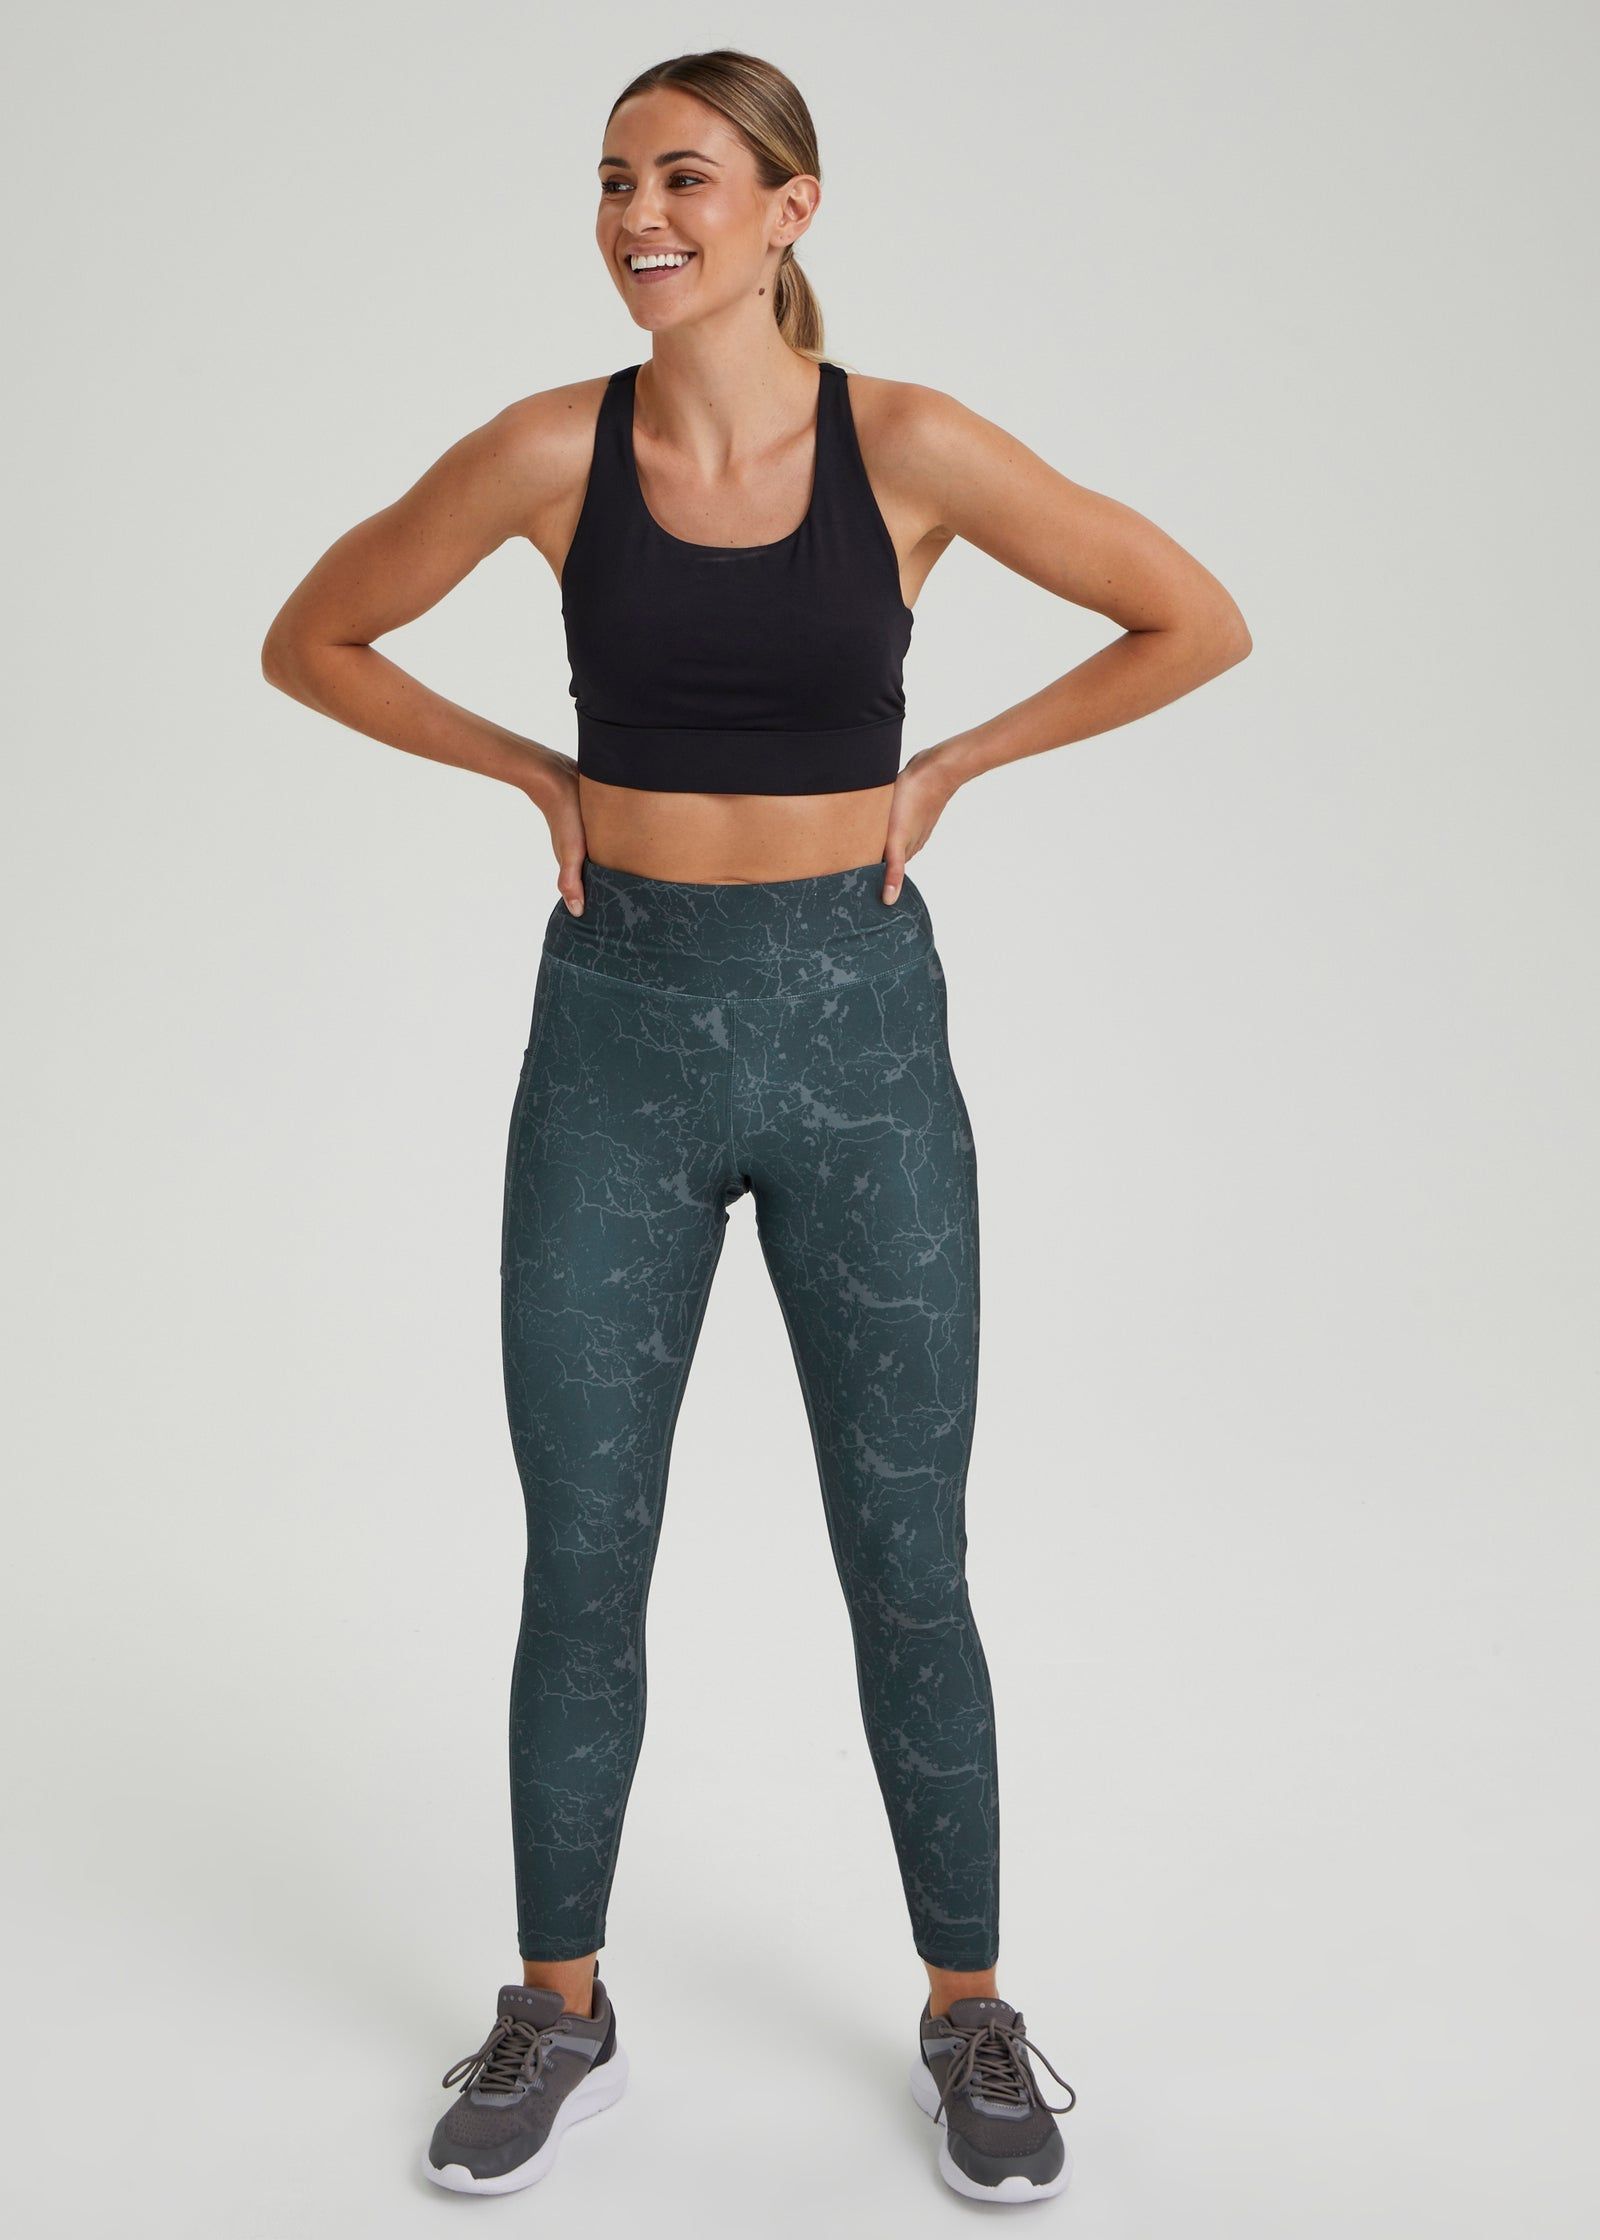 Buy Souluxe Charcoal Wavy Sports Leggings Online in Qatar from Matalan